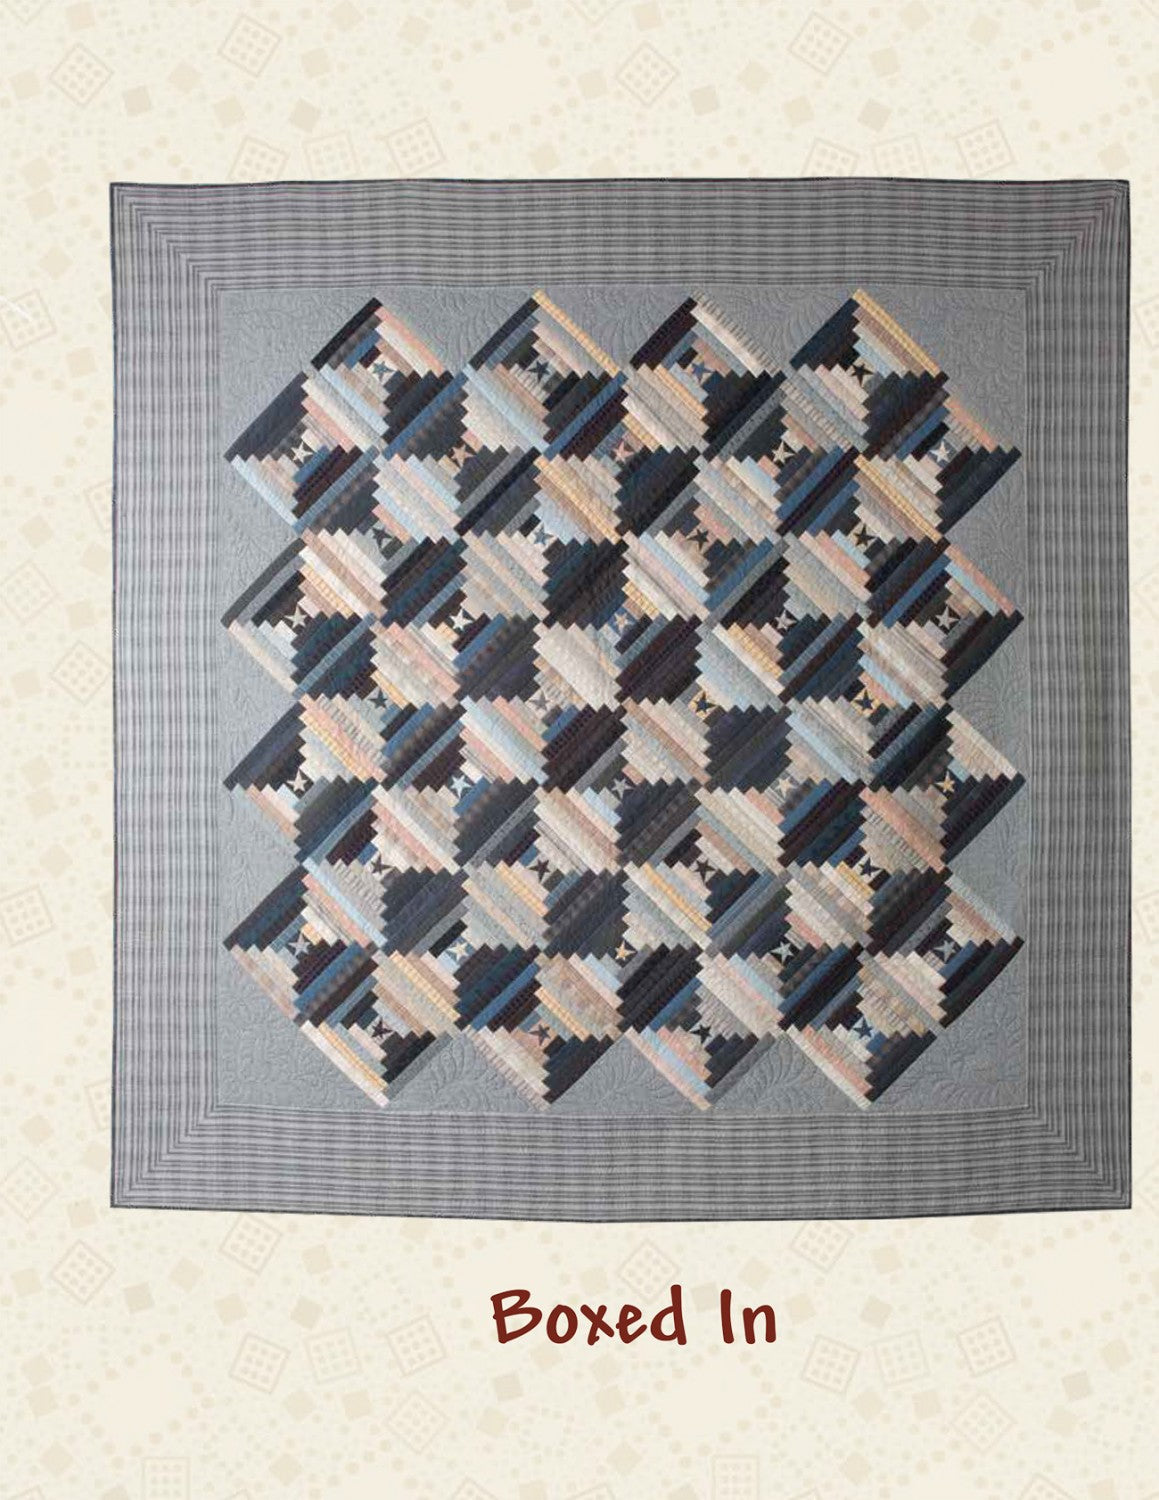 Down Home Quilts Quilt Pattern Book by Janet Nesbitt of One Sister Designs